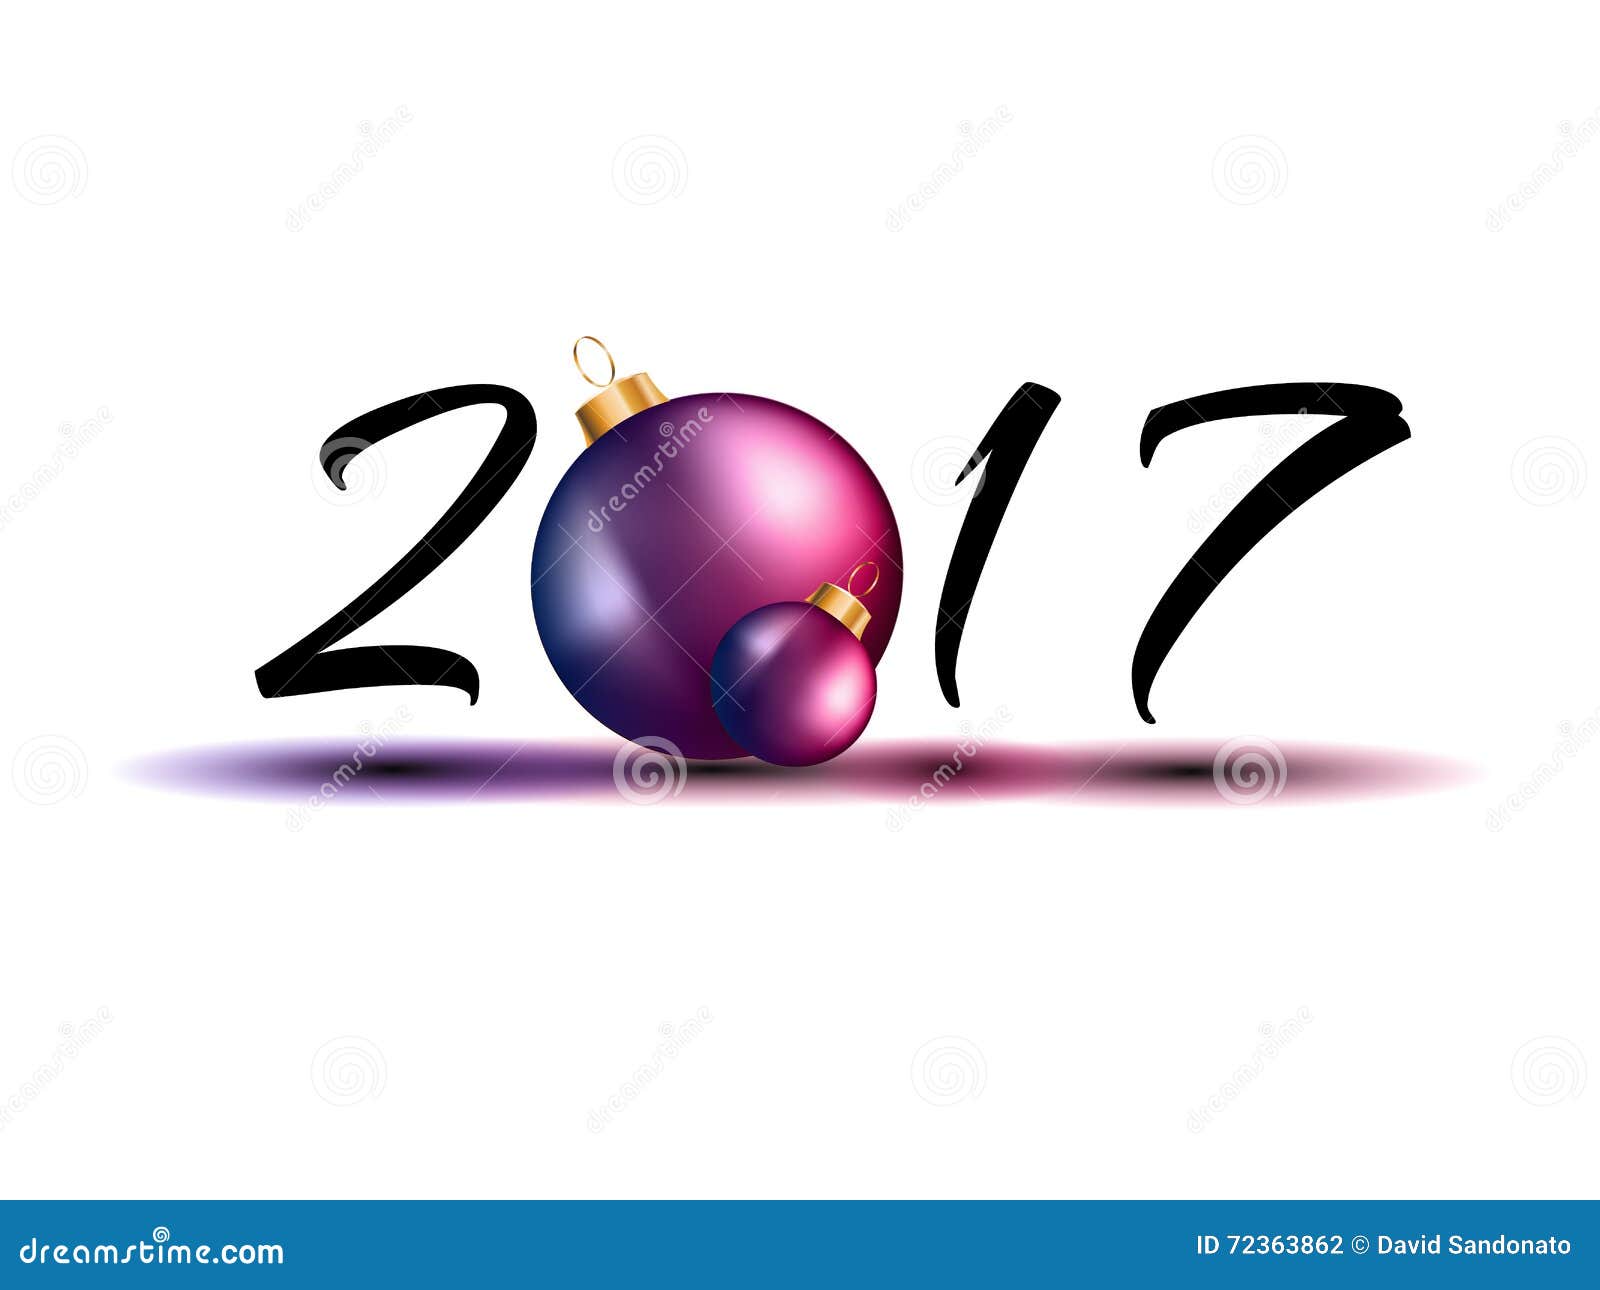 2017 Happy New Year Background for your Flyers and Greetings Card Ideal to use for parties invitation Dinner invitation Christmas Meeting events and so